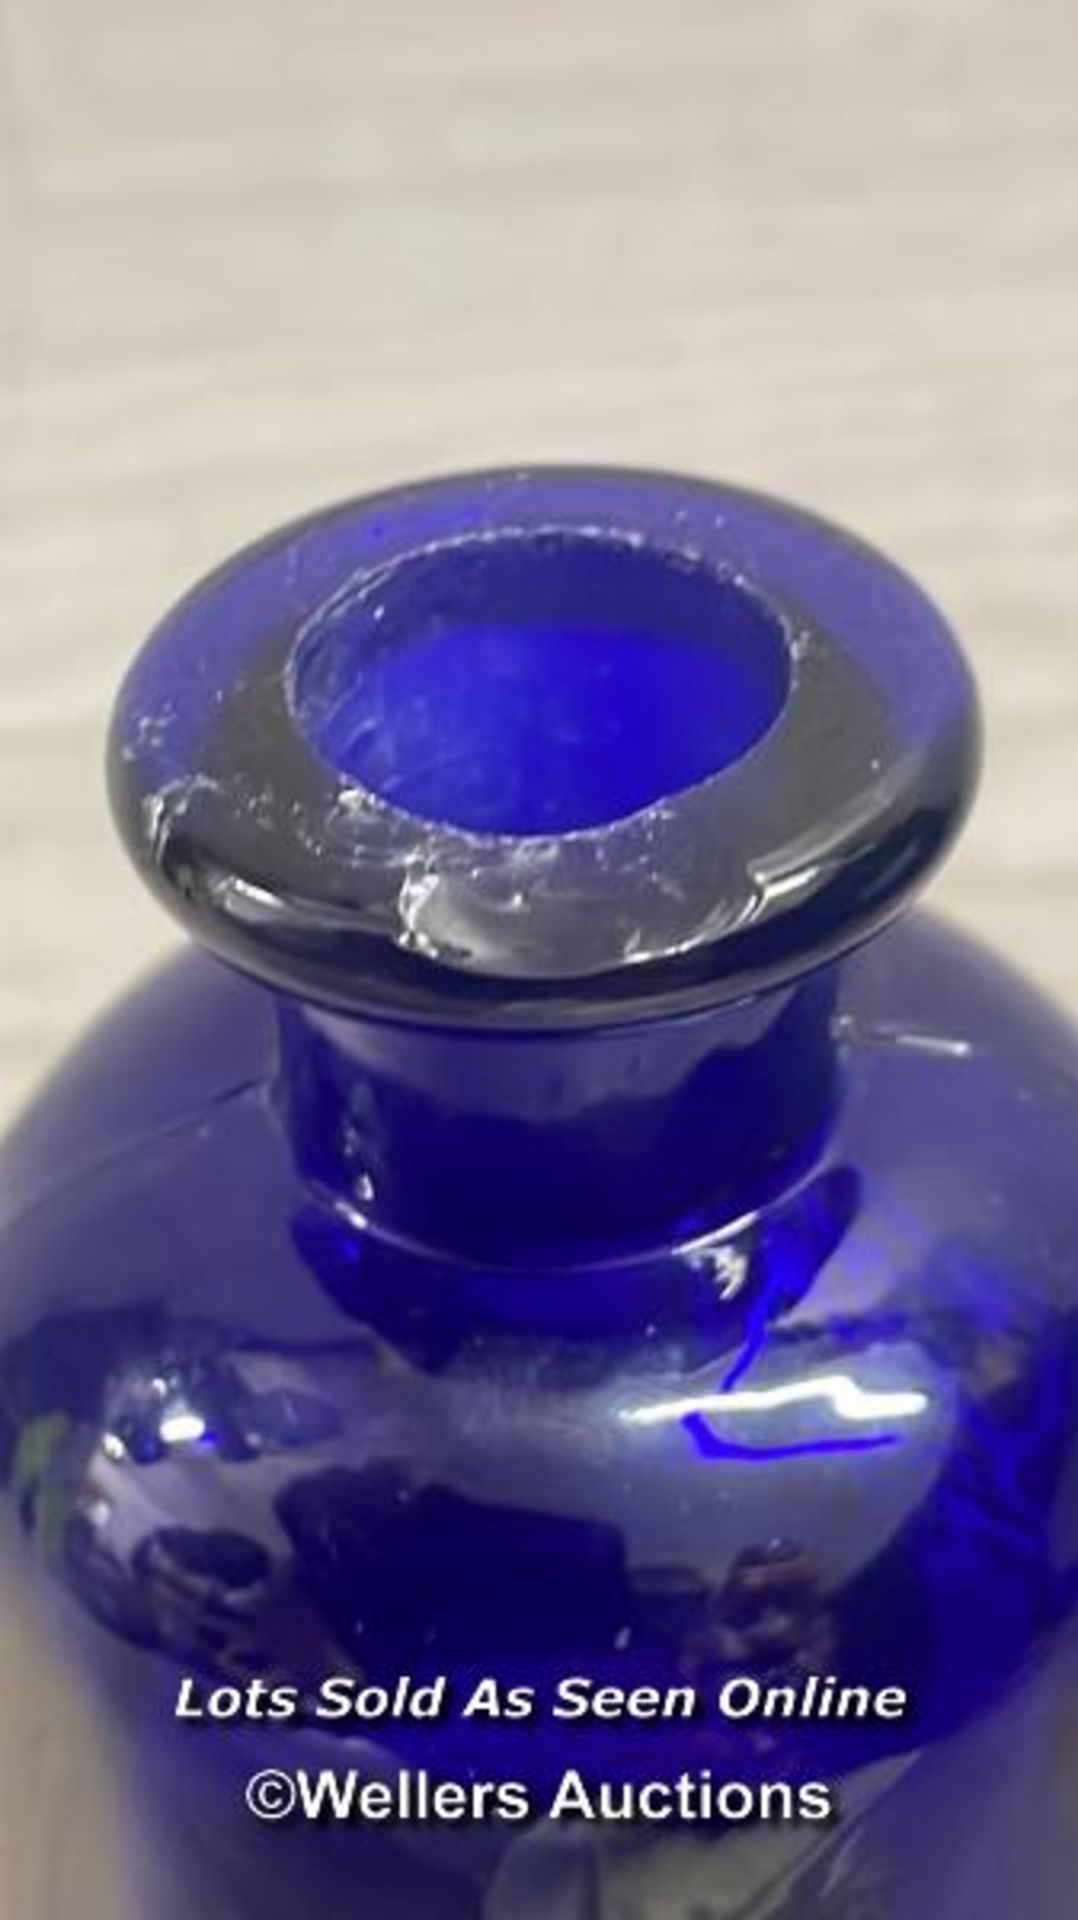 A RARE ROYAL PHARMACEUTICAL SOCIETY APOTHECARY BOTTLE, C1960'S, IN BLUE GLASS WITH GOLD LEAF LABEL - Image 5 of 6